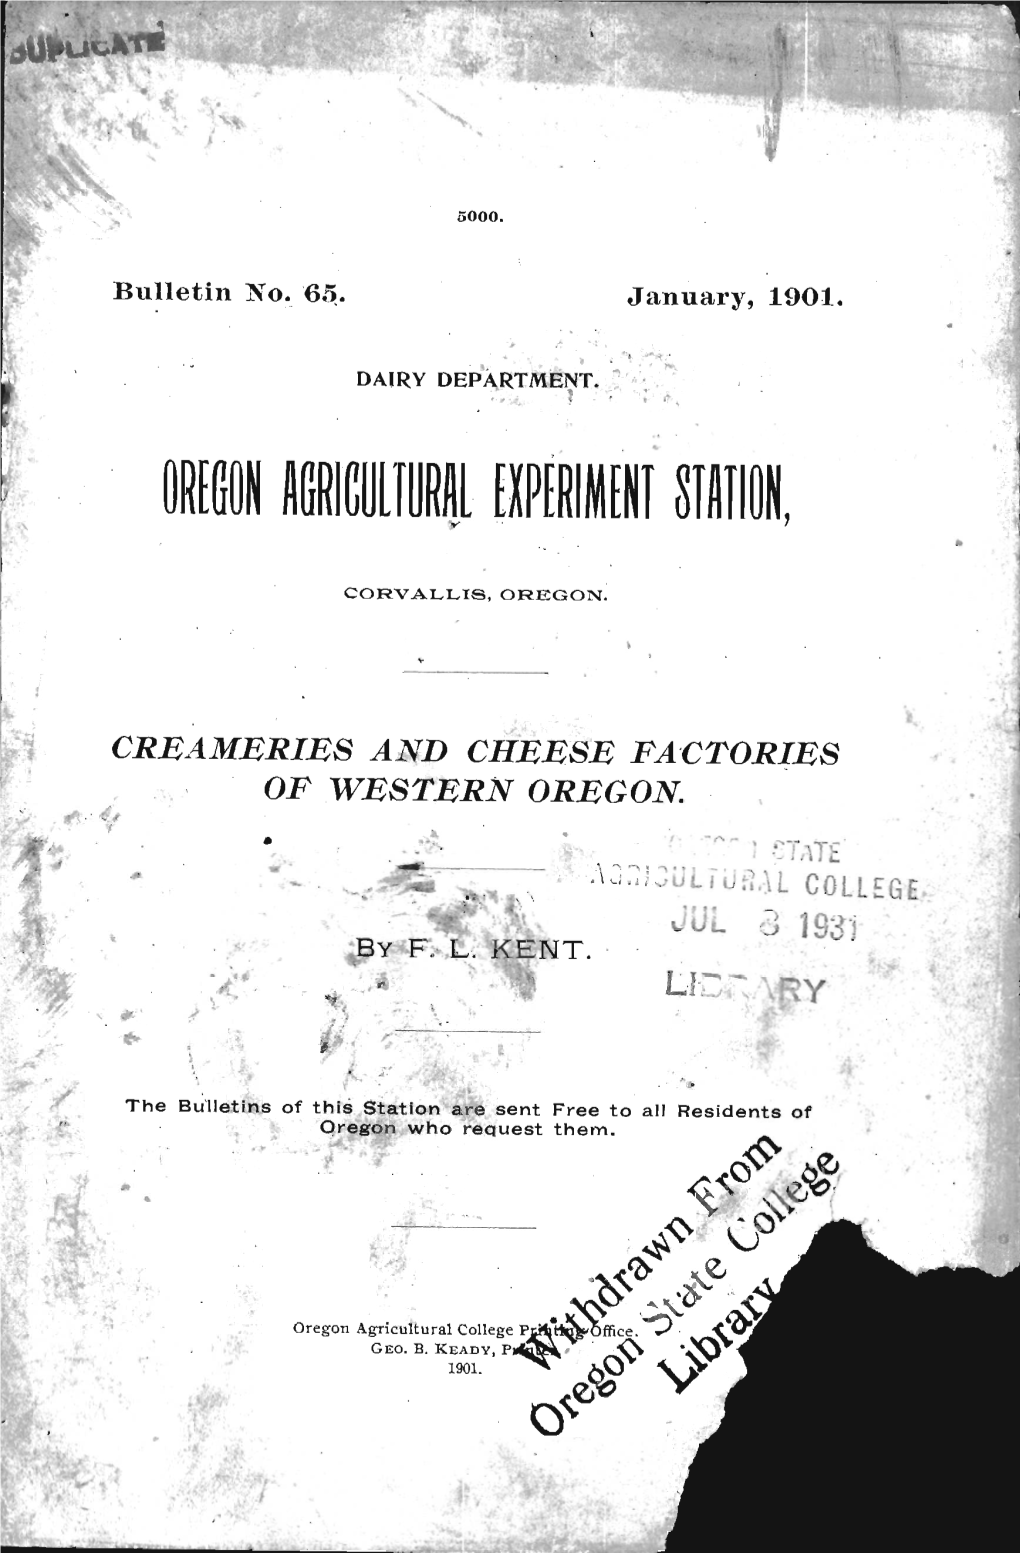 Creameries and Cheese Factories B F L